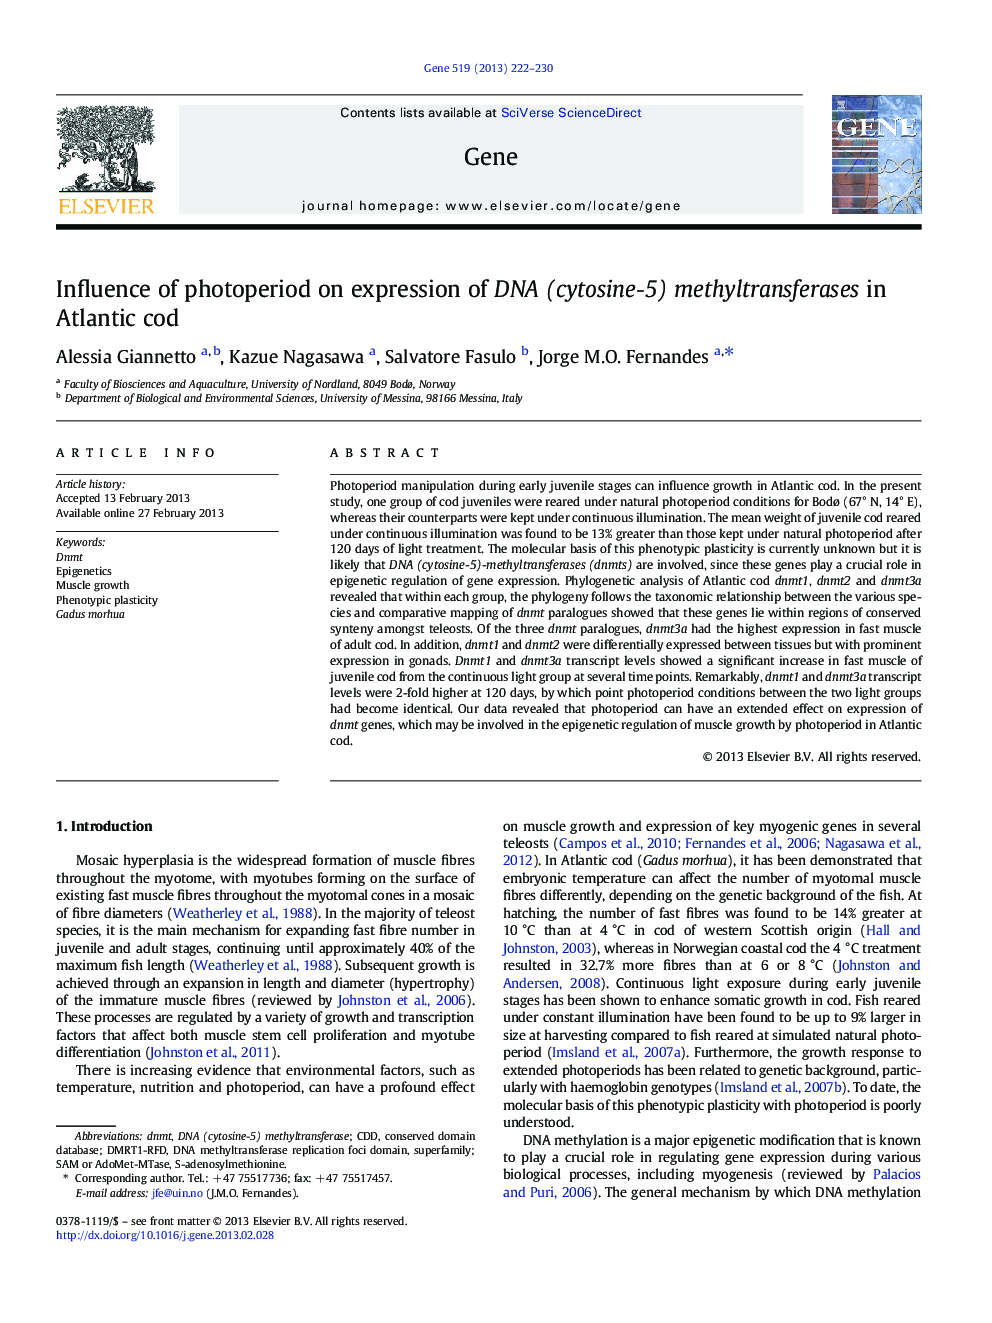 Influence of photoperiod on expression of DNA (cytosine-5) methyltransferases in Atlantic cod